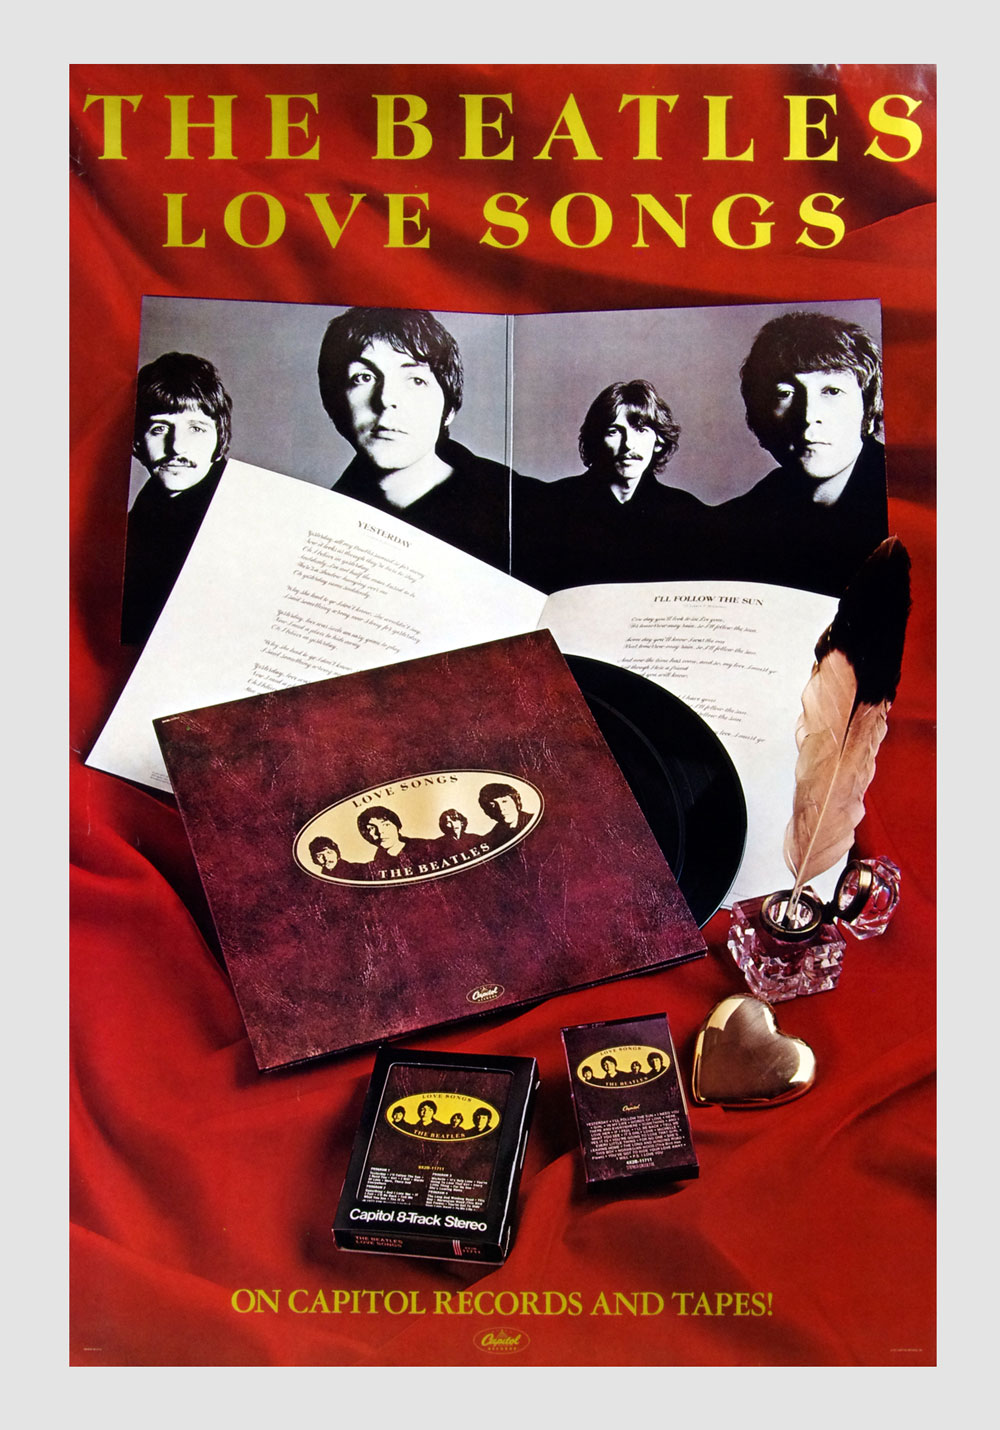 The Beatles Poster 1977 Love Songs New Album Promotion Capitol Records